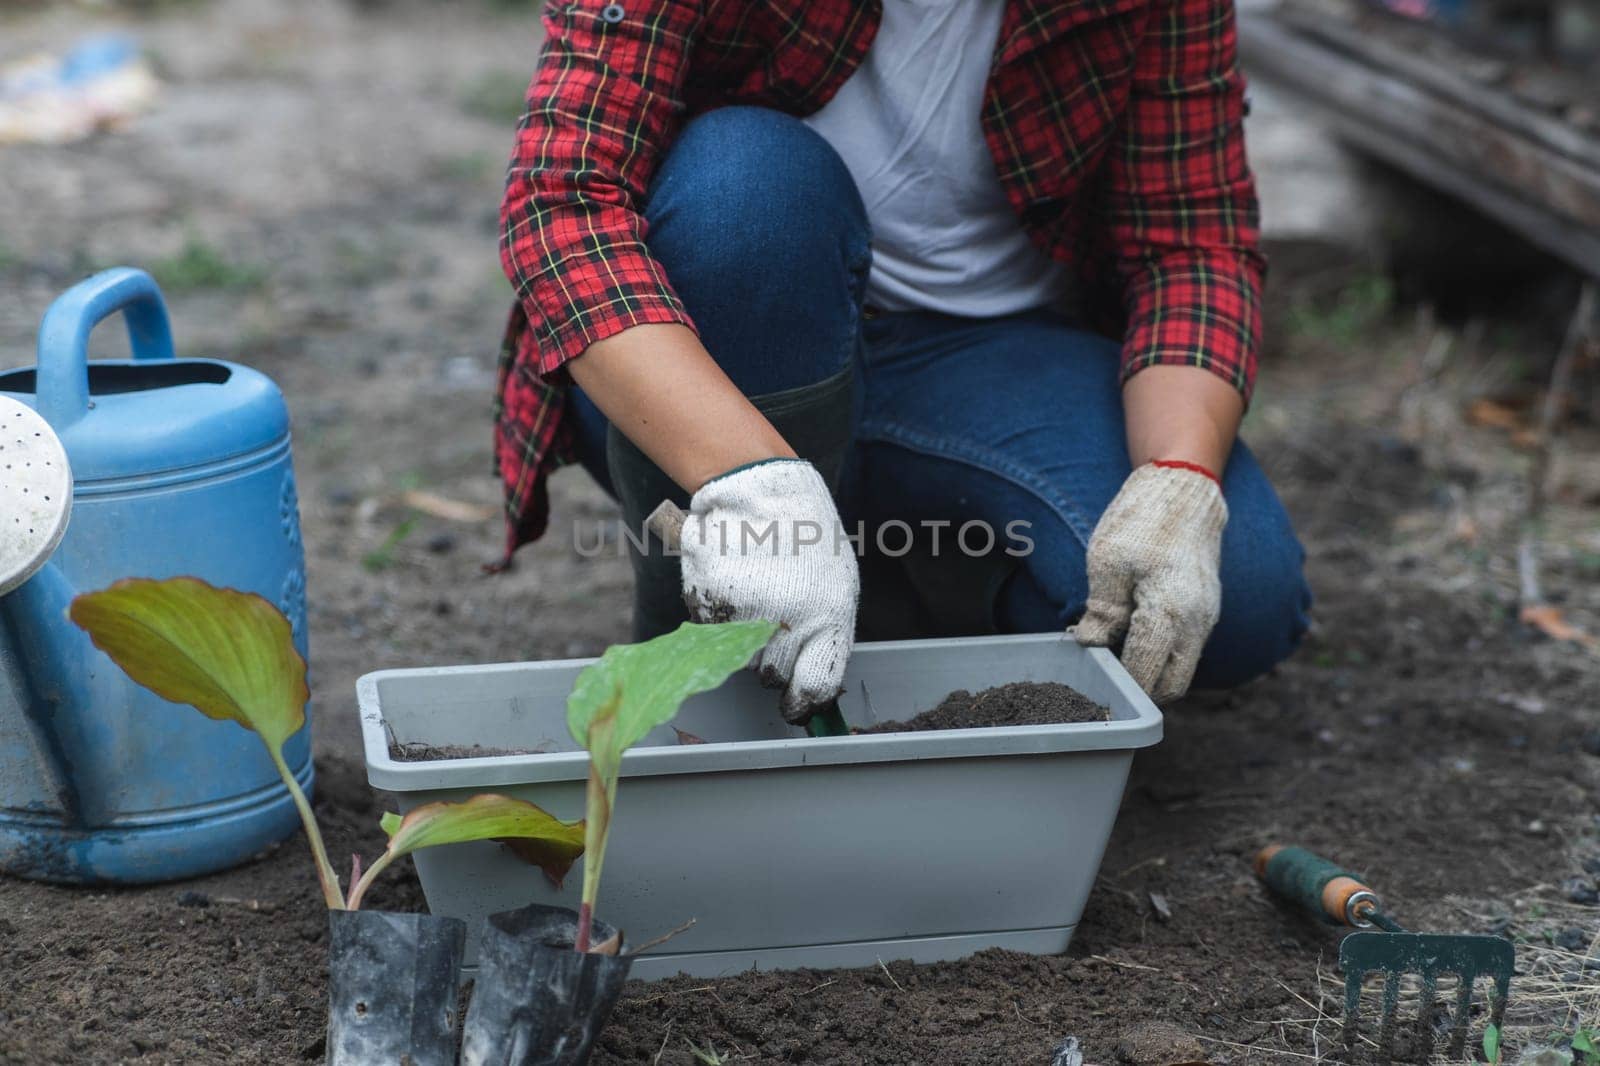 agriculture, botany, care, closeup, cultivate, cultivating, cultivation, digging, dirt, earth, eco, ecology, environment, female, garden, gardener, gardening, gloves, green, greenery, grow, growing, growth, hand, hands, hobby, holding, home, horticulture, landscaping, leaf, lifestyle, nature, person, plant, planting, pot, potted, potting, seedling, soil, sprout, summer, thumb, tool, transplant, transplanting, woman, work, working